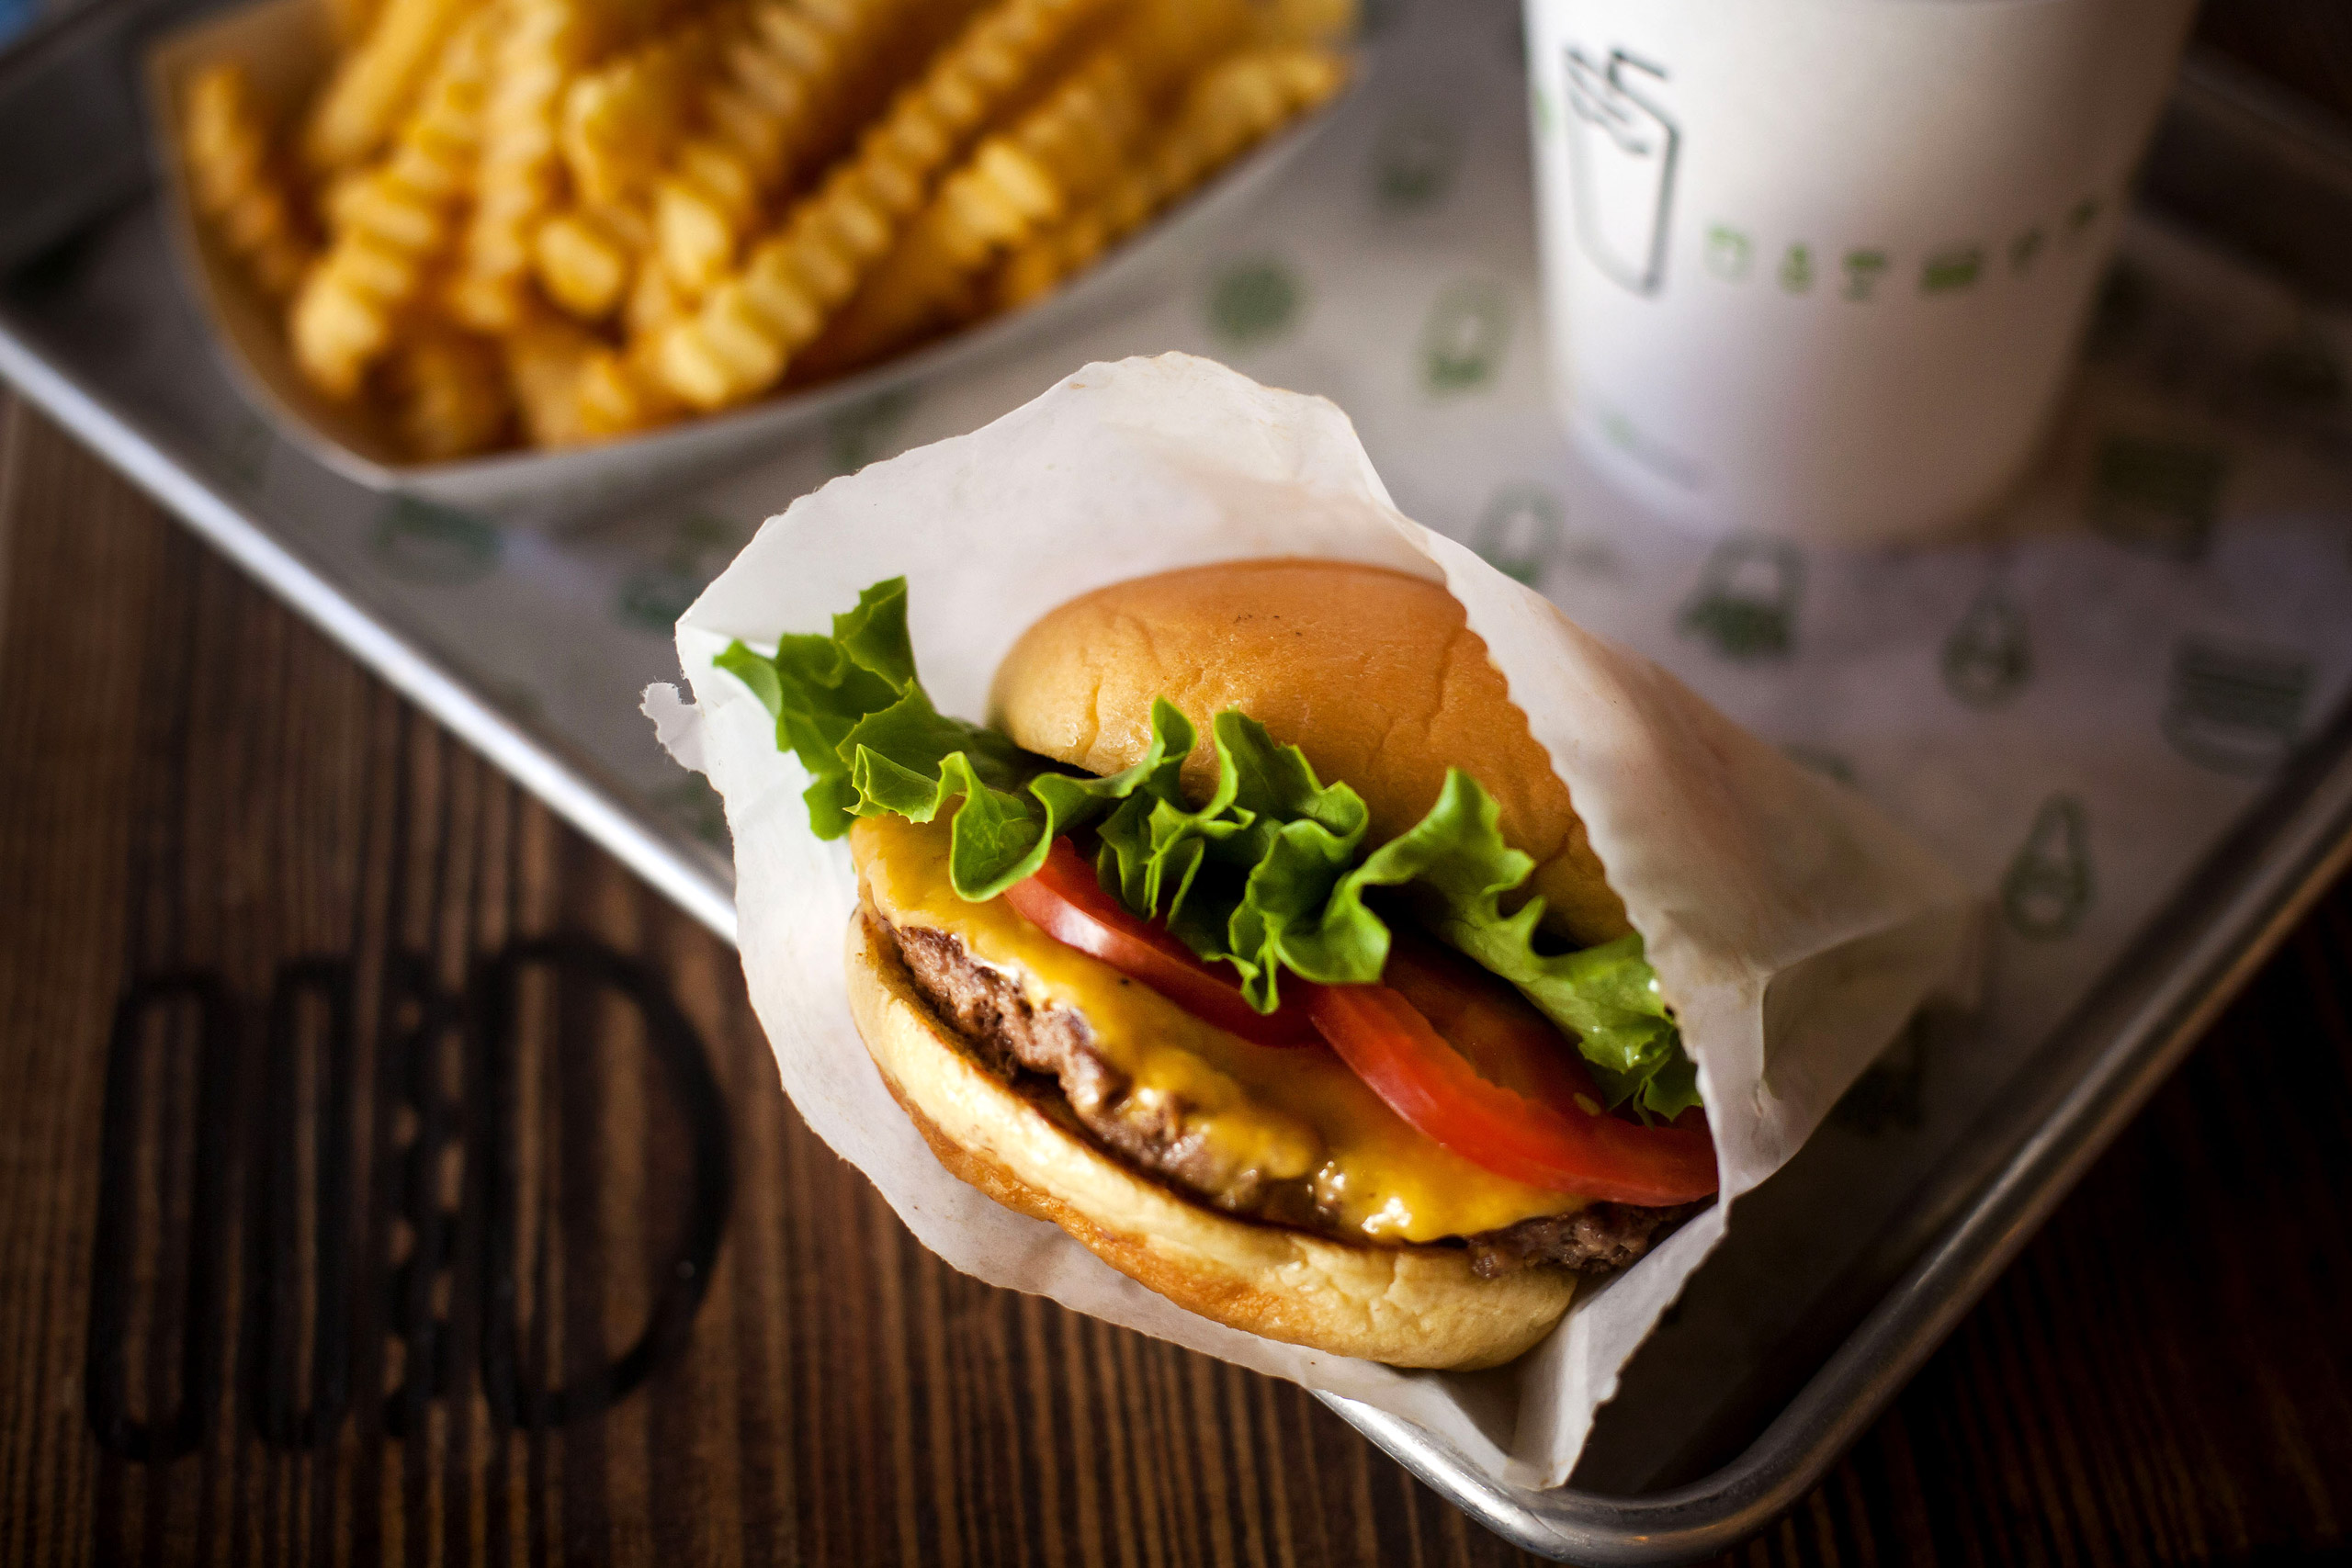 A Shake Shack burger in New York City on Sept. 10, 2014. (Michael Nagle—Bloomberg/Getty Images)